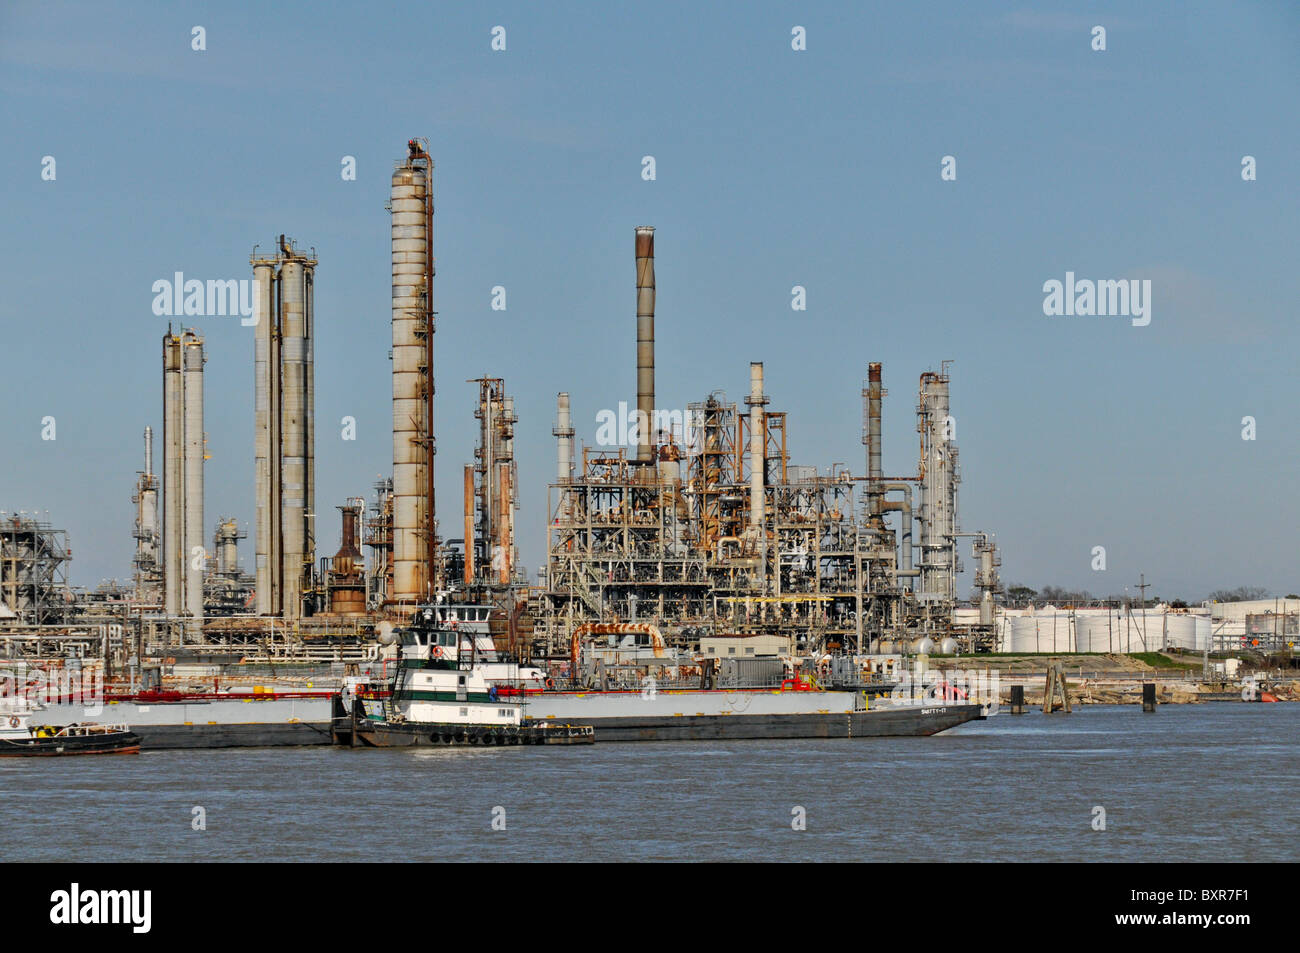 Barges unloading at Chevron oil refinery (largest refinery in US), Mississippi River, New Orleans, Louisiana Stock Photo